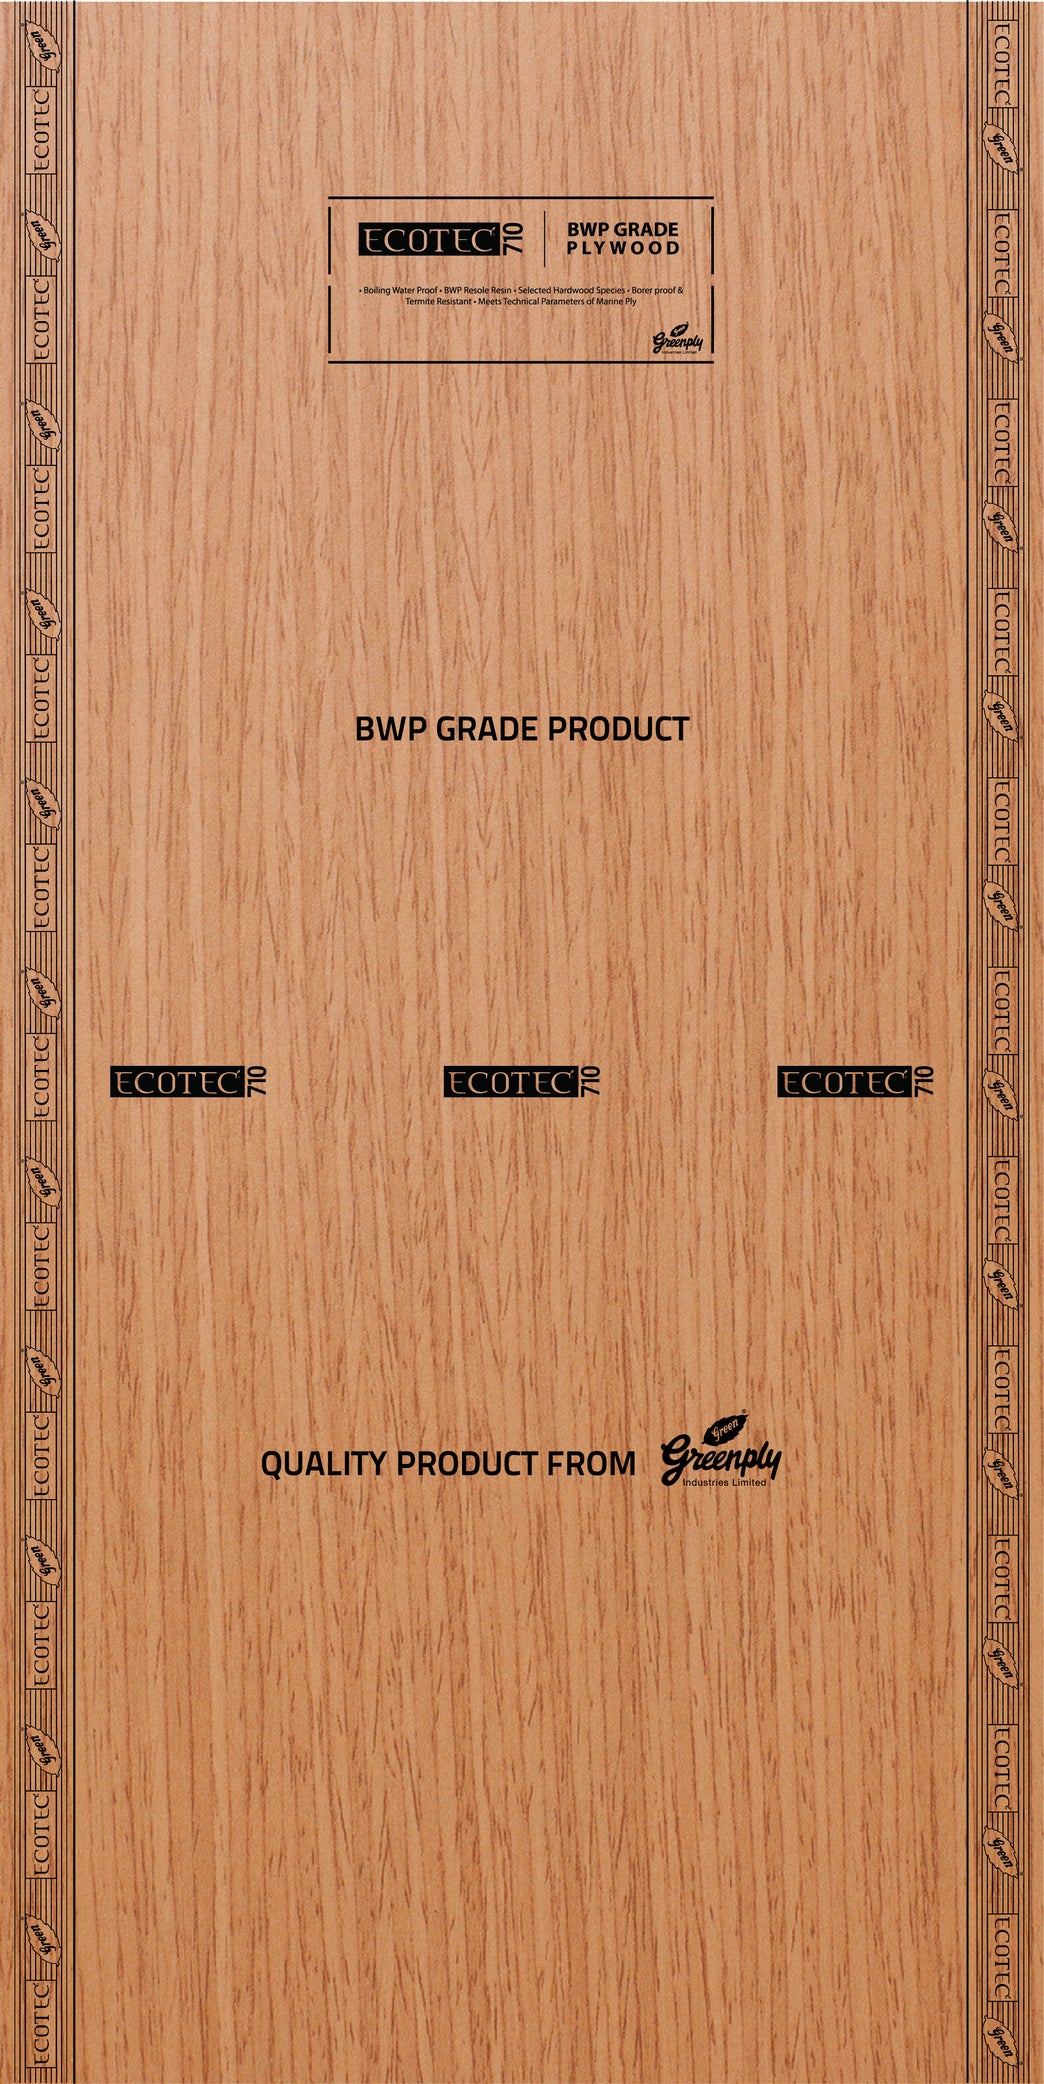 Greenply Ecotec Bwp Grade Plywood  Thickness 18 Mm Plywood